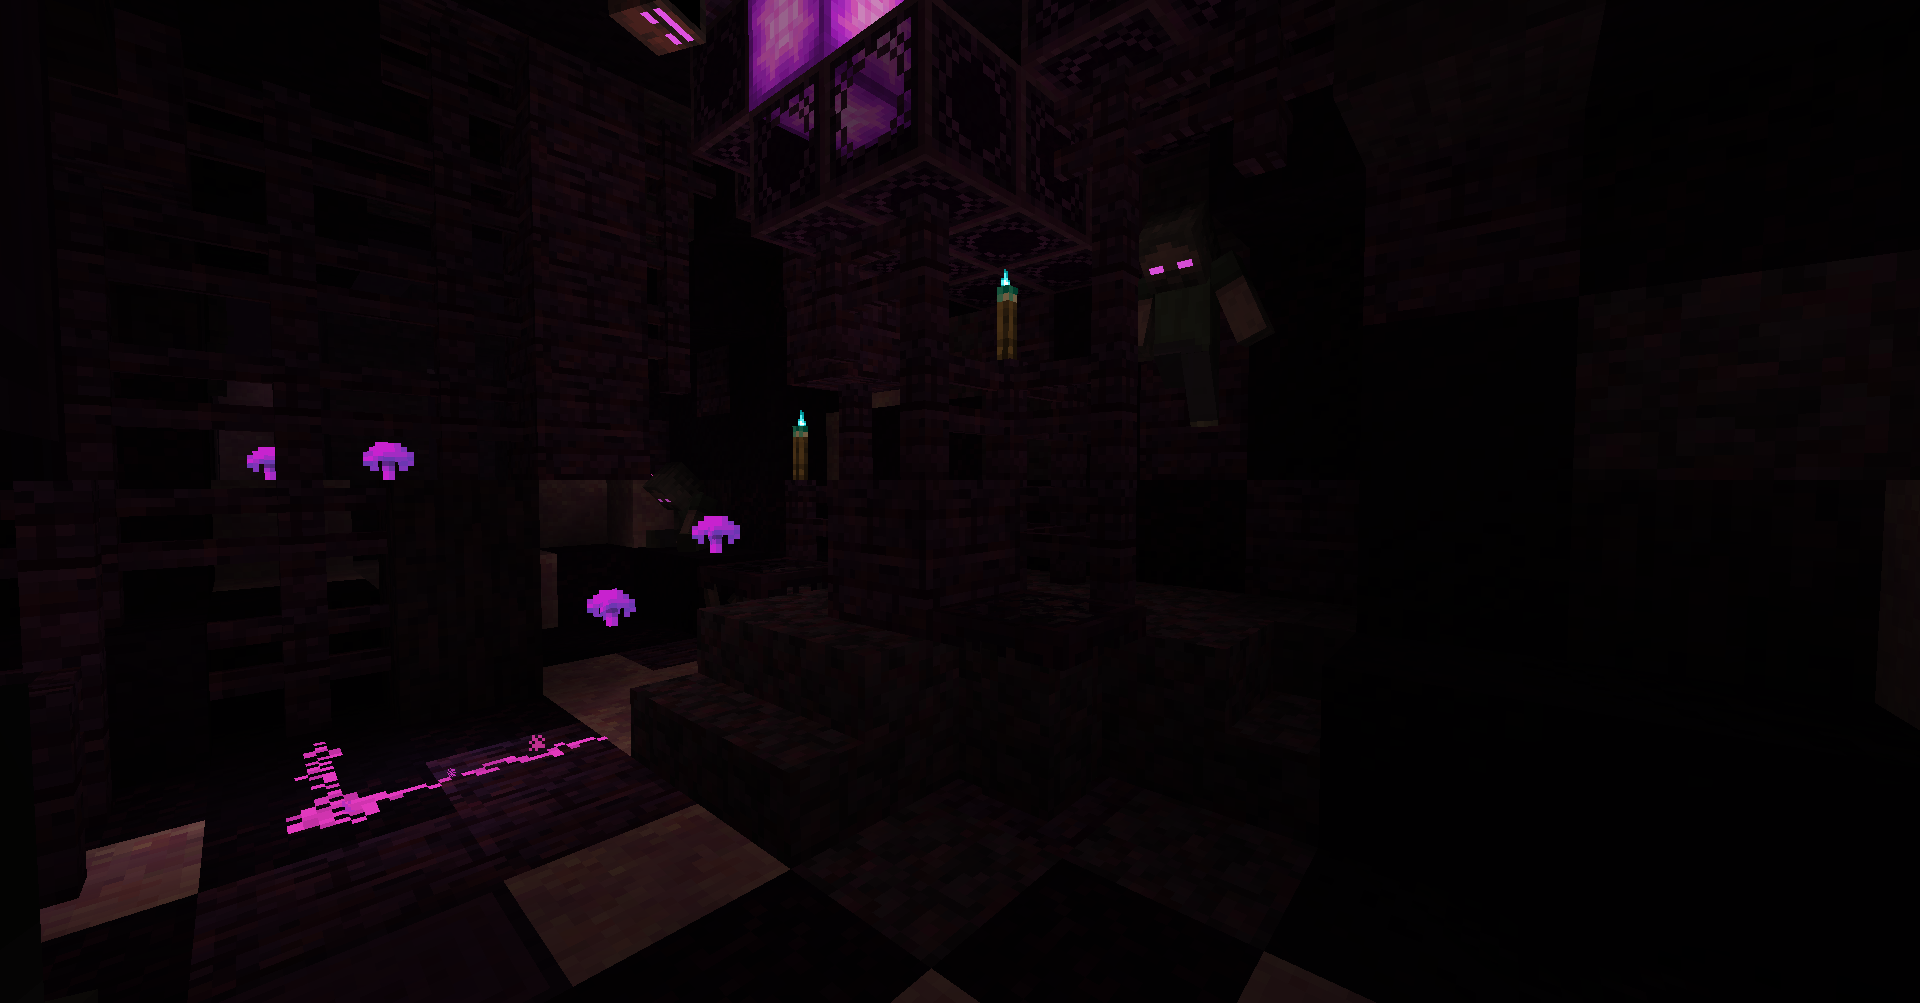 The Bowels of the Wither Storm